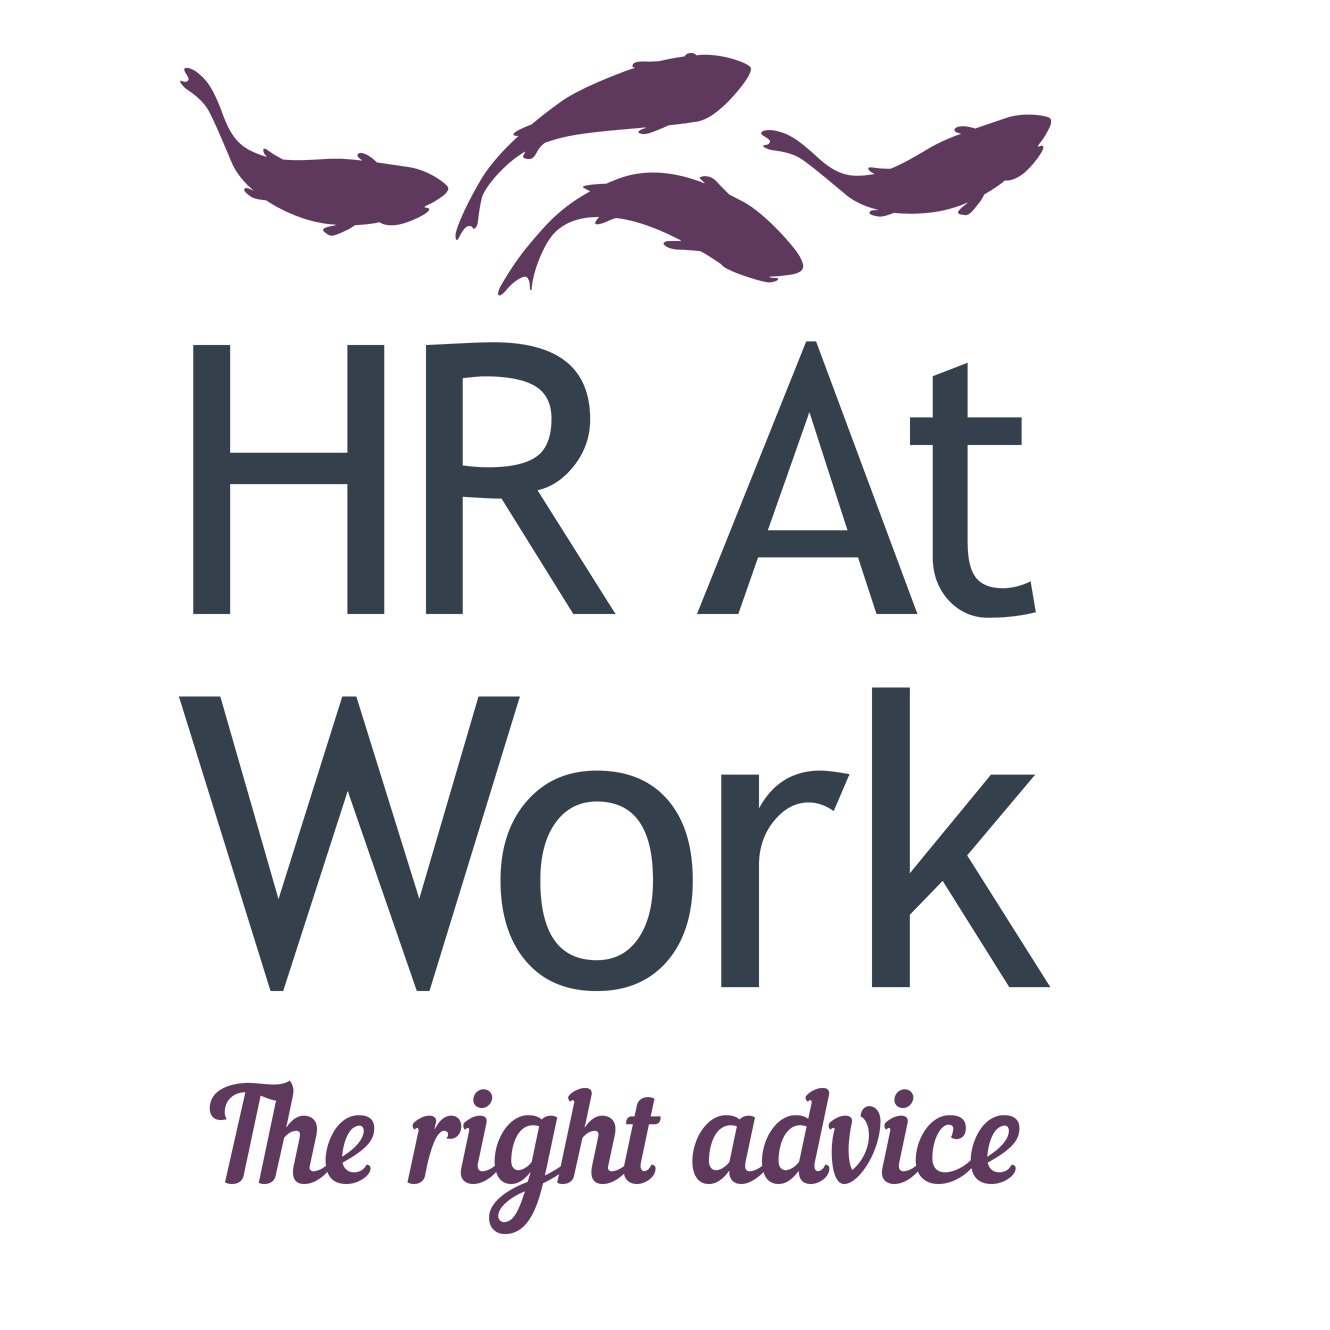 We are HR, employment and employee relations specialists advising across the UK, Channel Islands and Isle of Man. Contact us today!